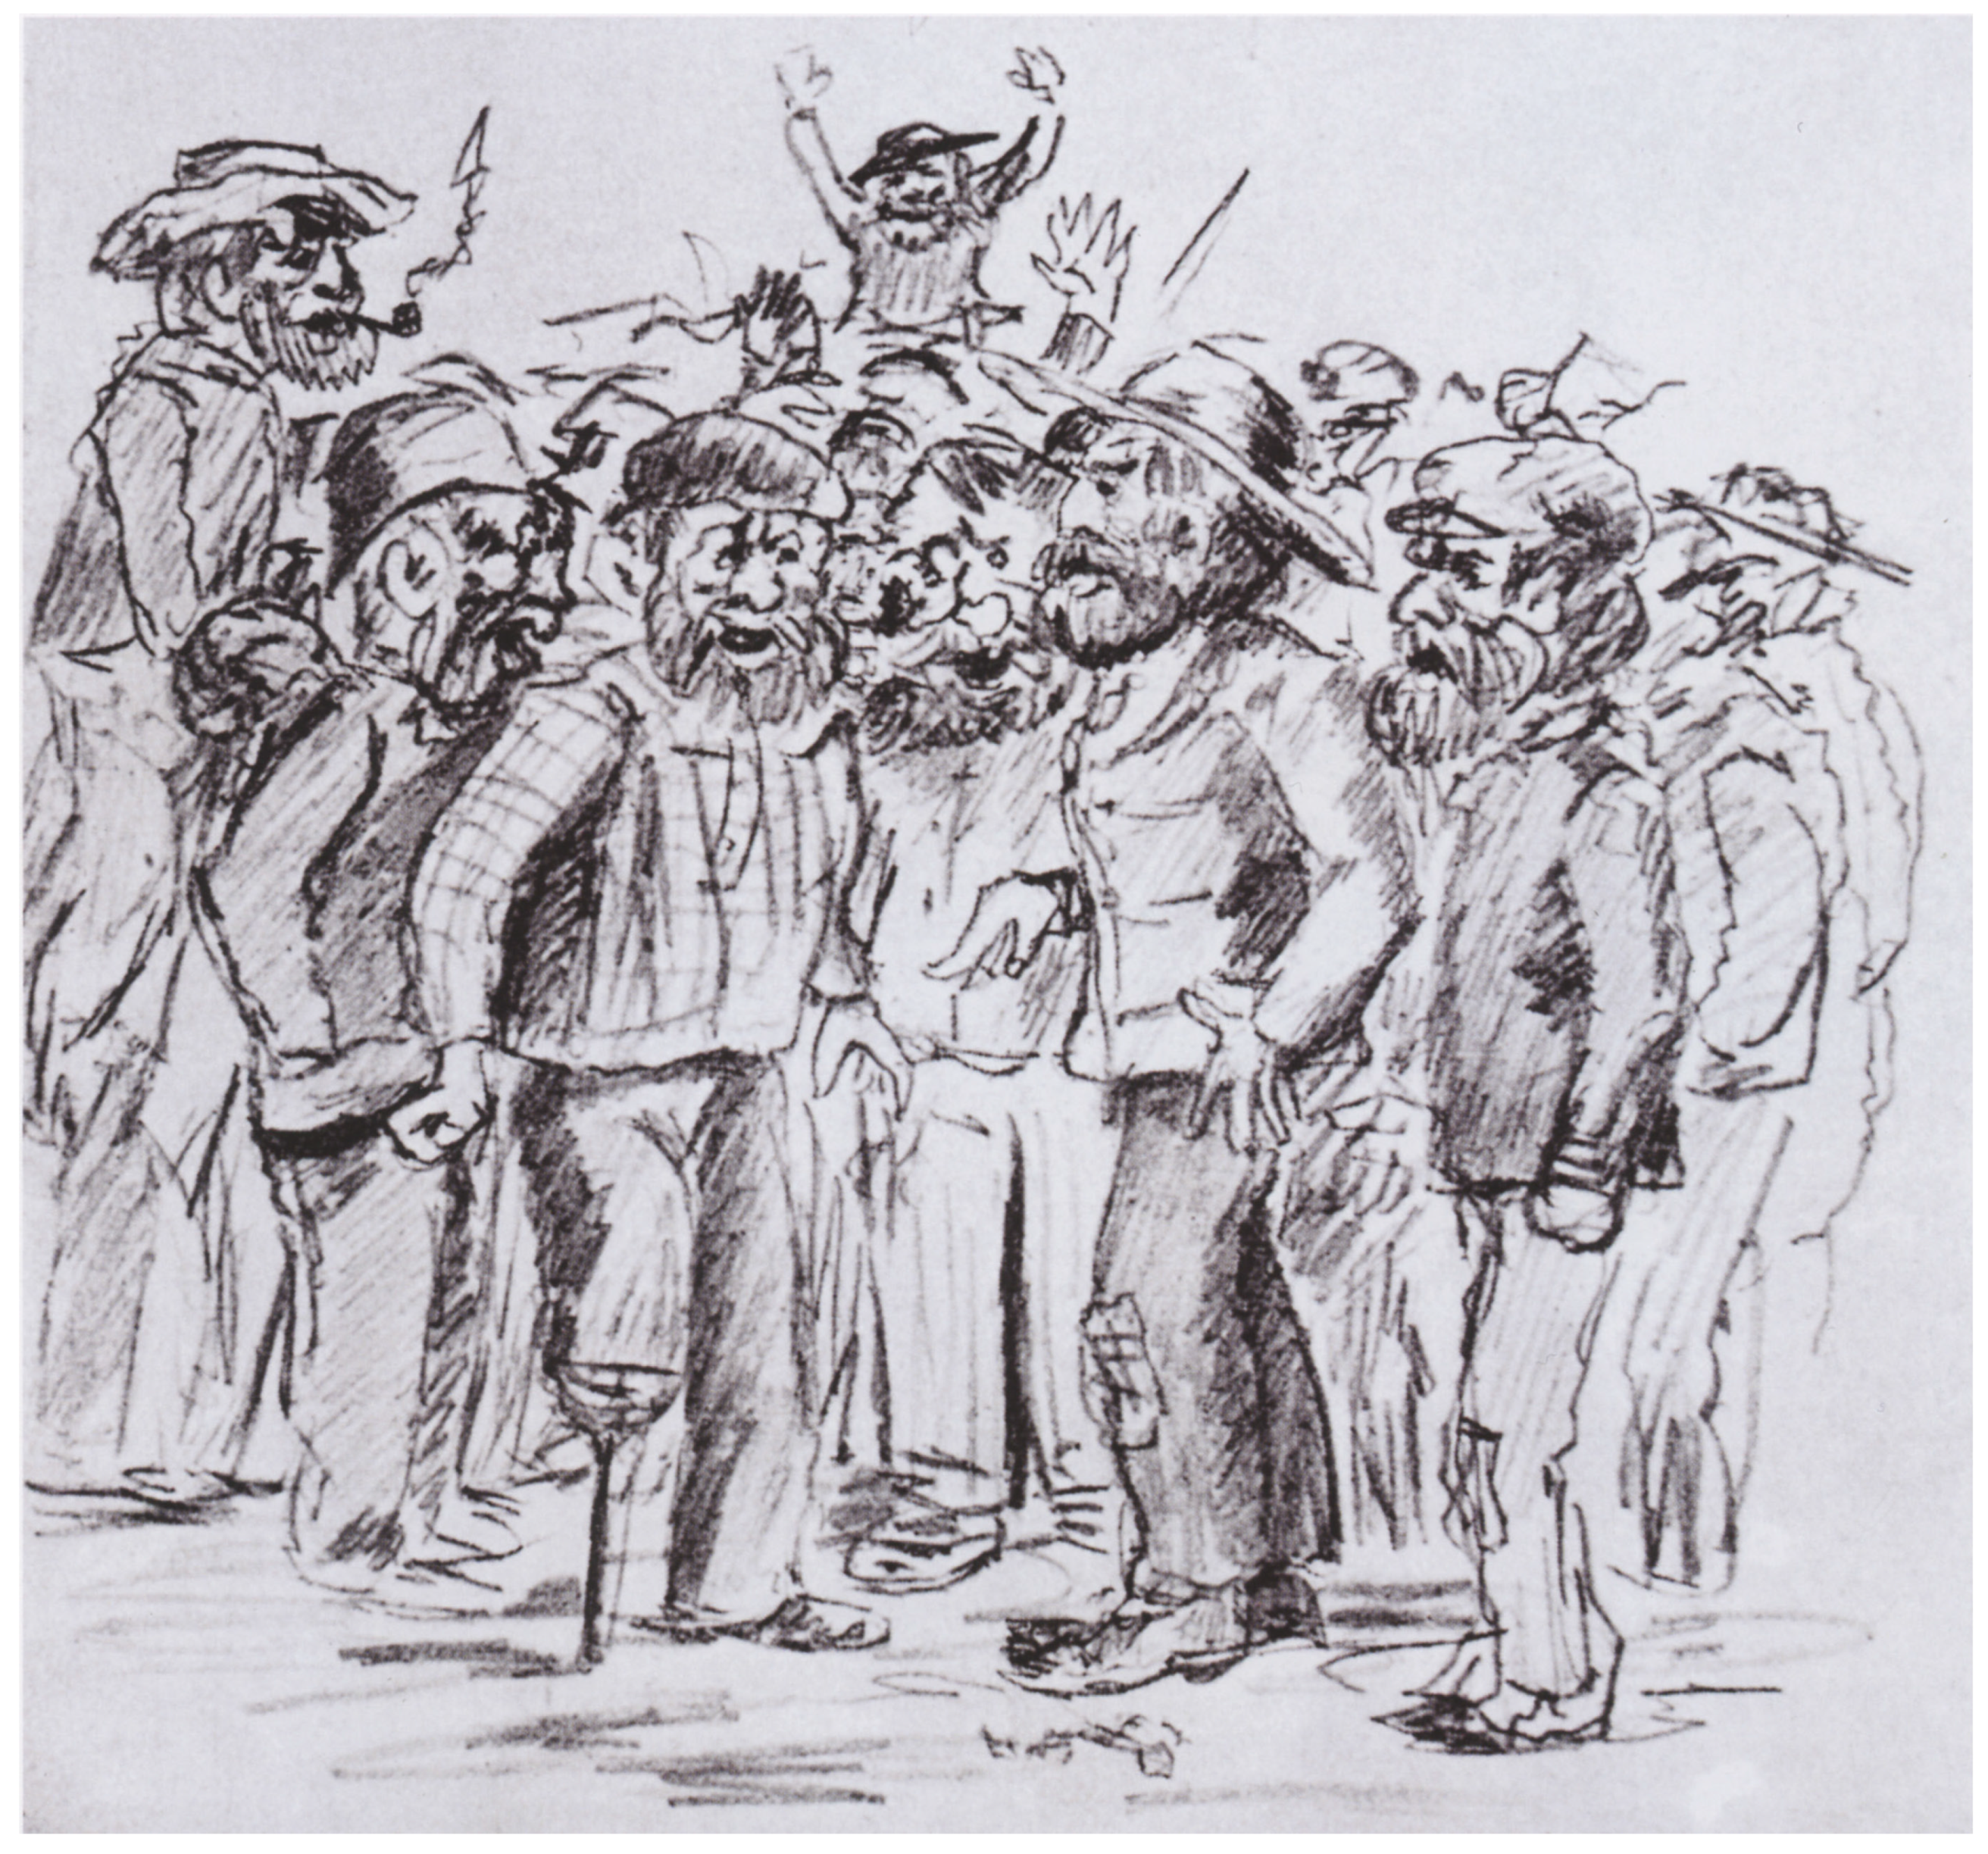 Arts | Free Full-Text | Journalism, Caricature and Satirical Drawings in  Early Picasso (1891–1895): The Awakening of Pablo Ruiz's Critical  Consciousness